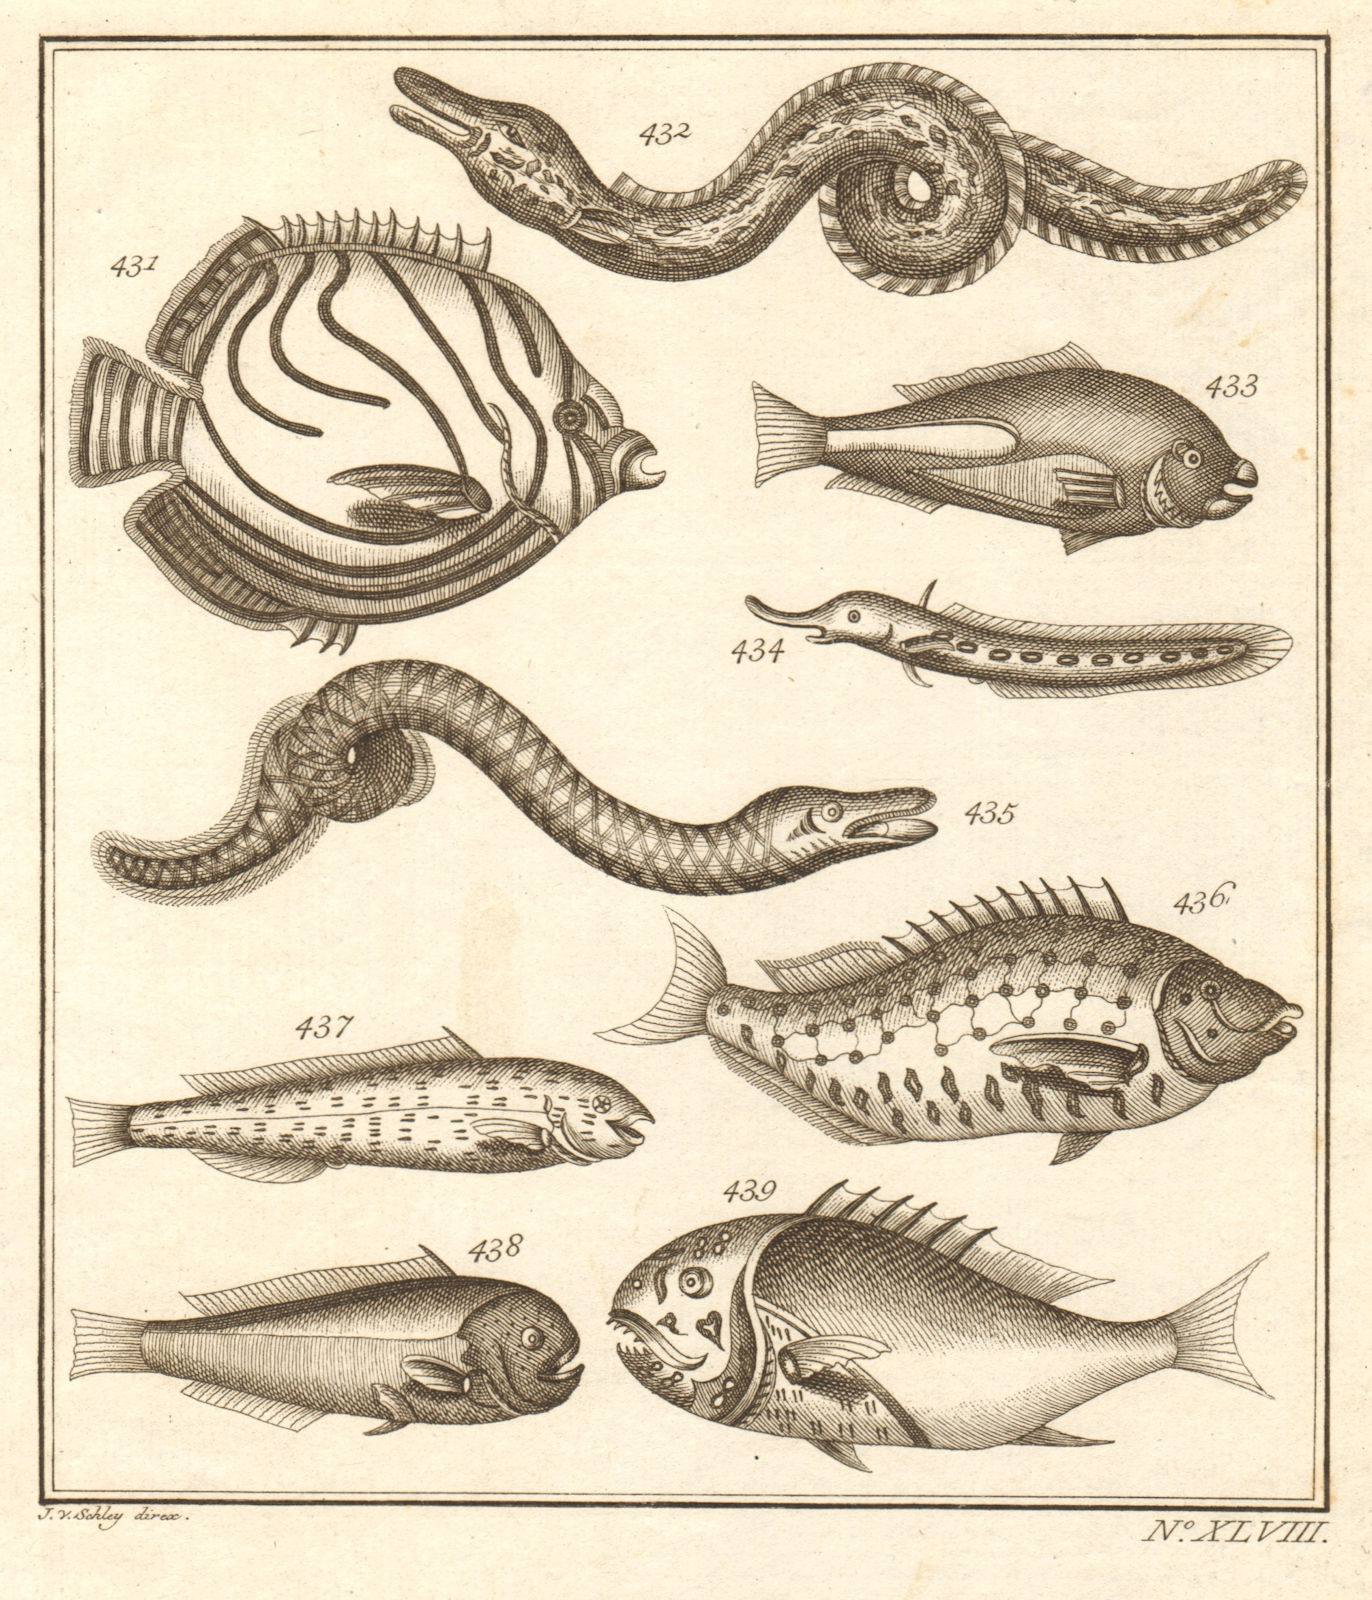 Associate Product XLVIII. Poissons d'Ambione. Indonesia Moluccas Maluku tropical fish. SCHLEY 1763